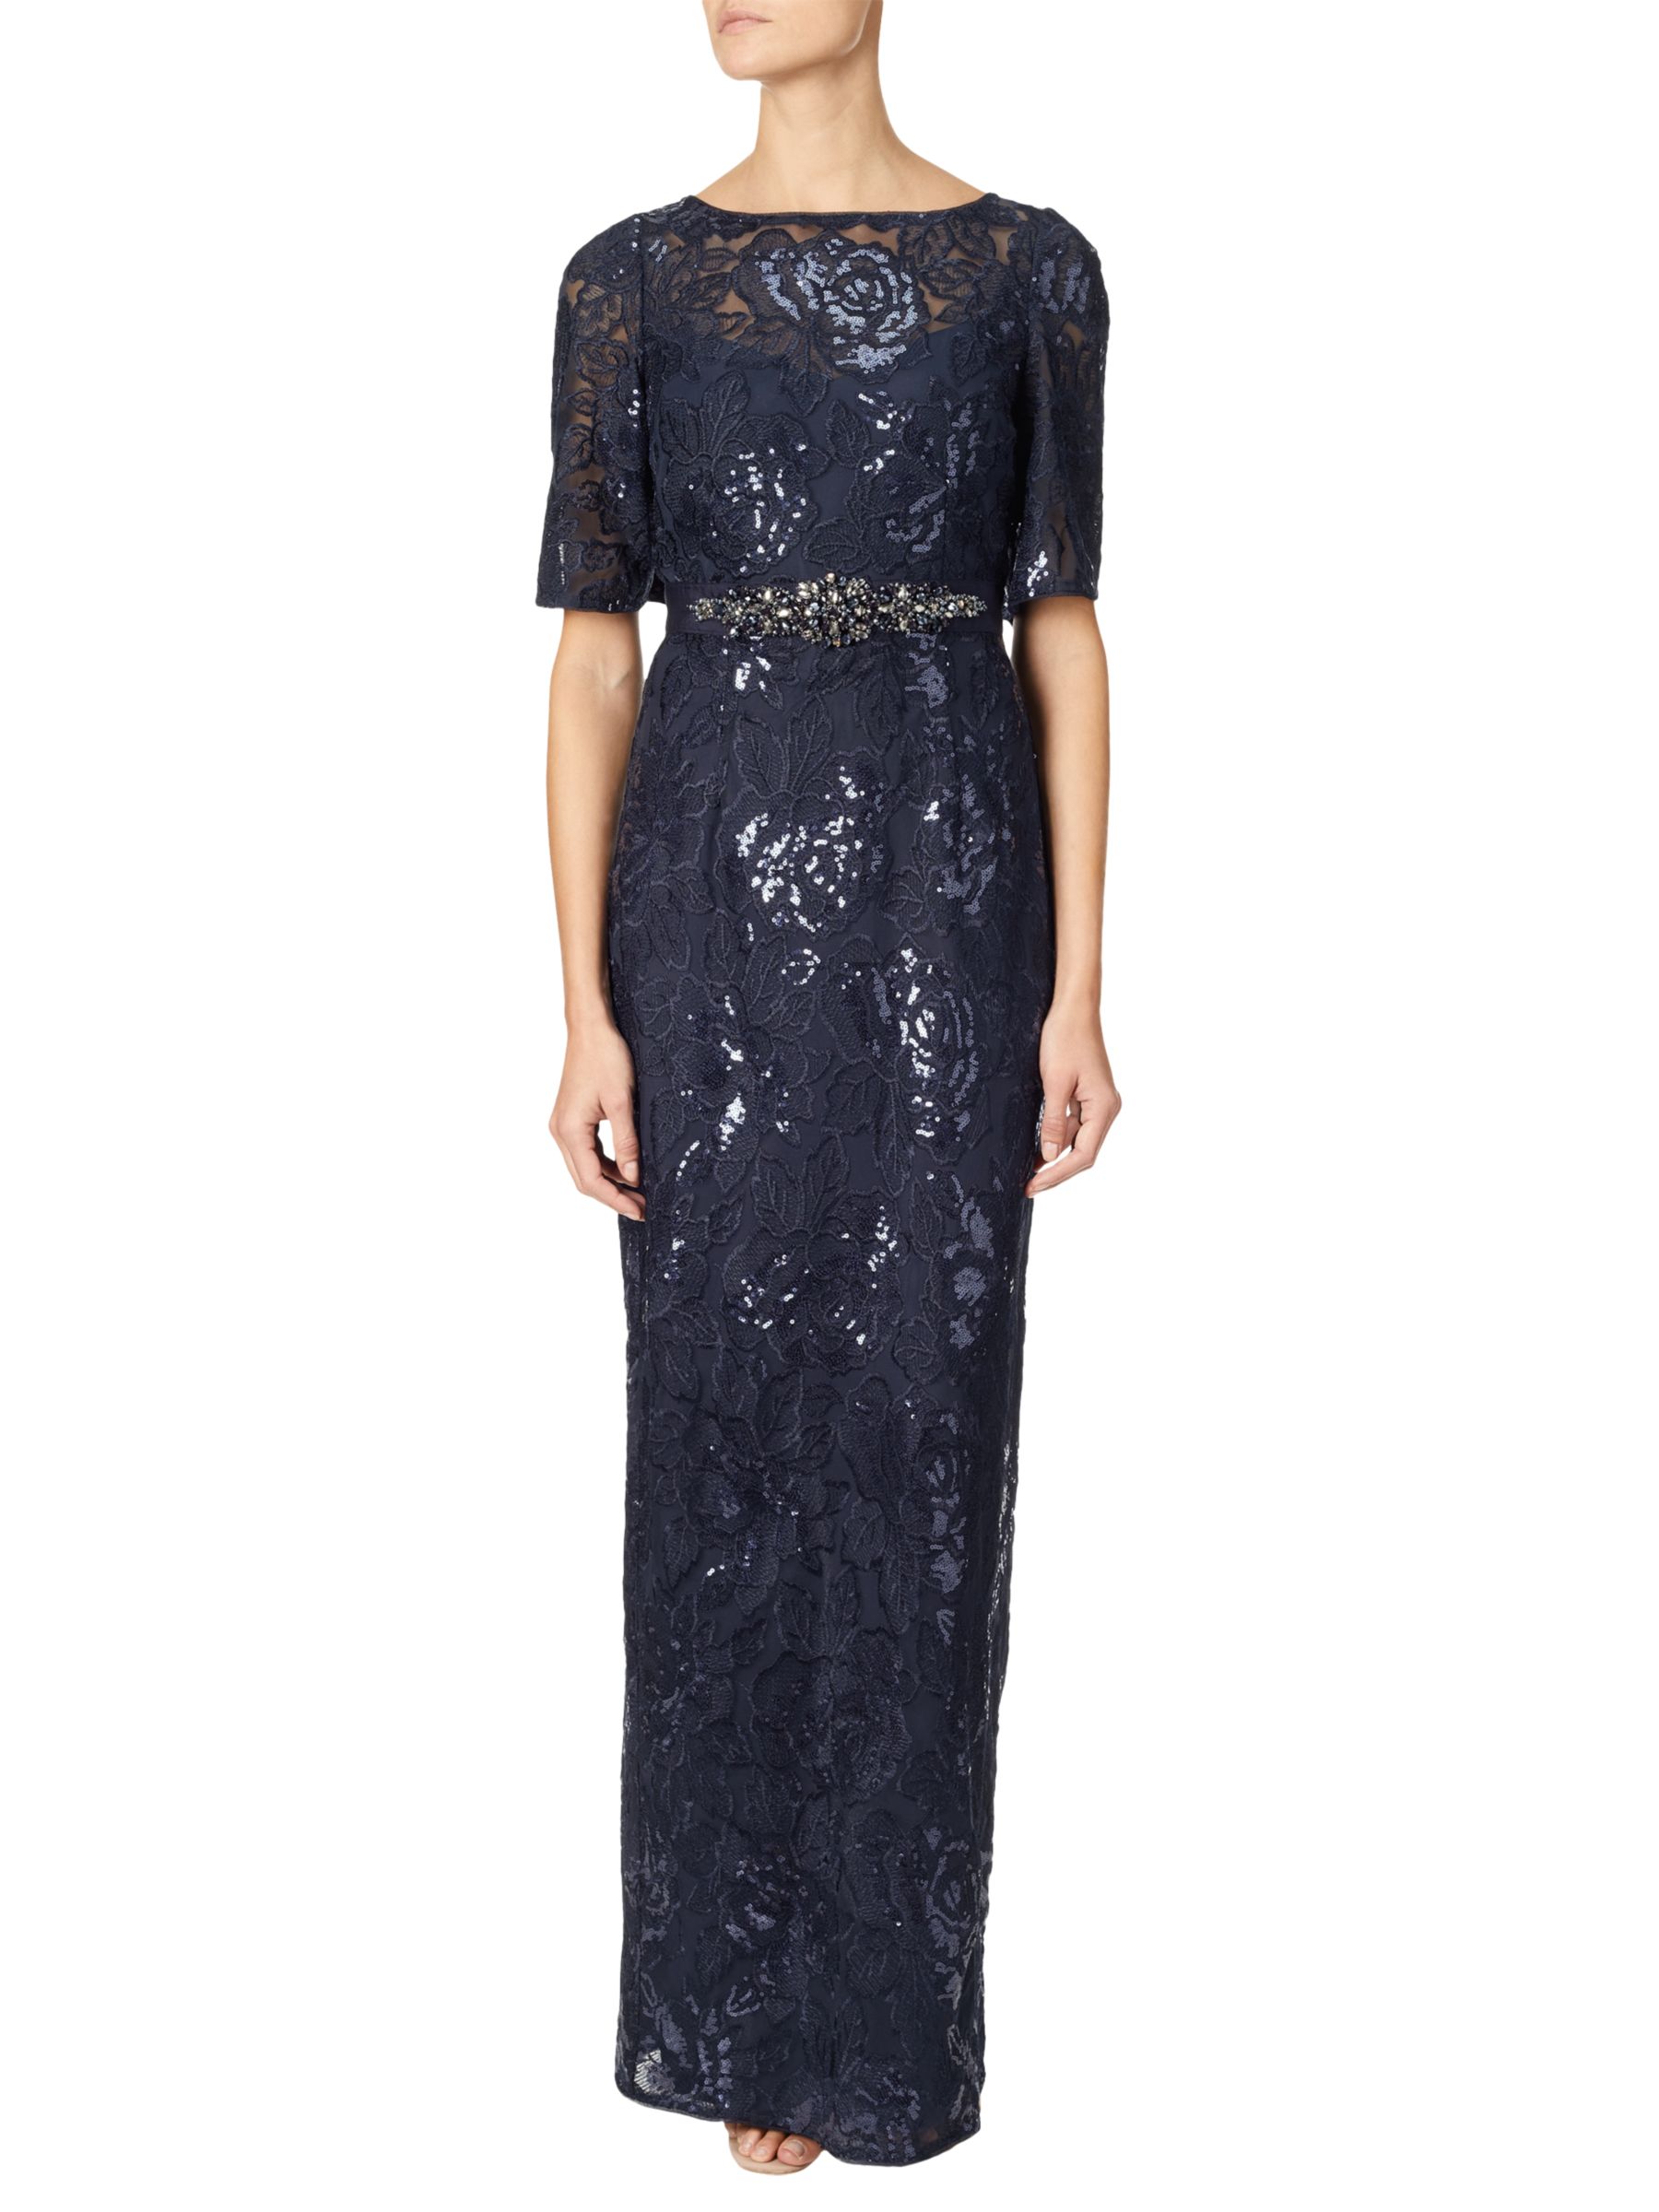 Adrianna Papell Sequin Embroidered Dress, Midnight